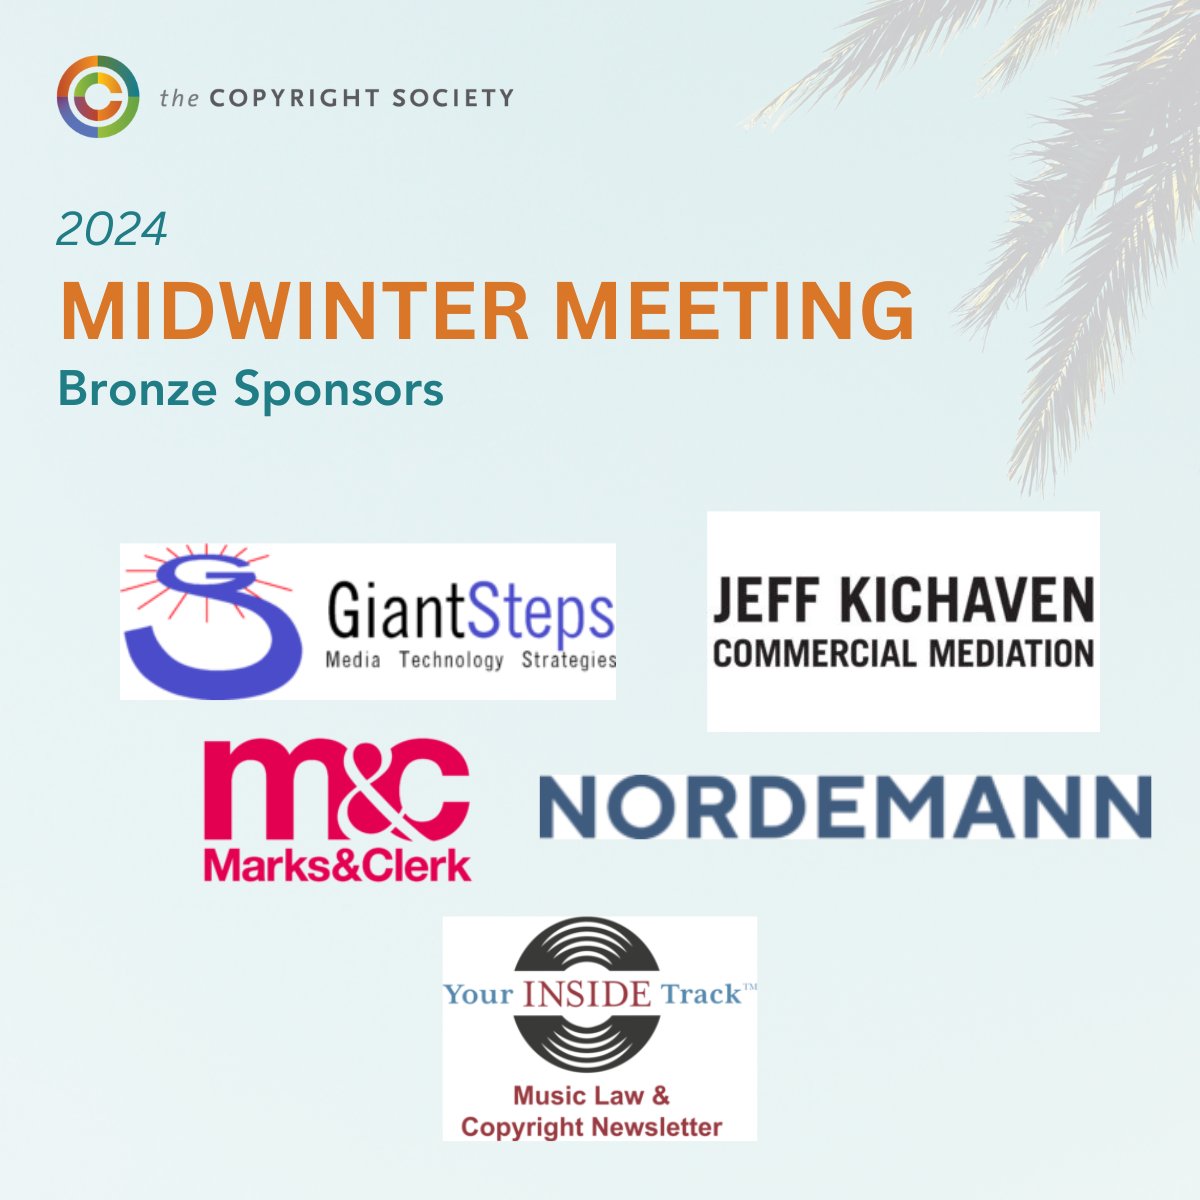 Thanking our Bronze Sponsors for enriching the 2024 Midwinter Meeting: GiantSteps (@copyrightandtec), @JeffKichaven, @marksandclerk, Nordemann, and @YrInsideTrack. #CopyrightMW #CopyrightSociety